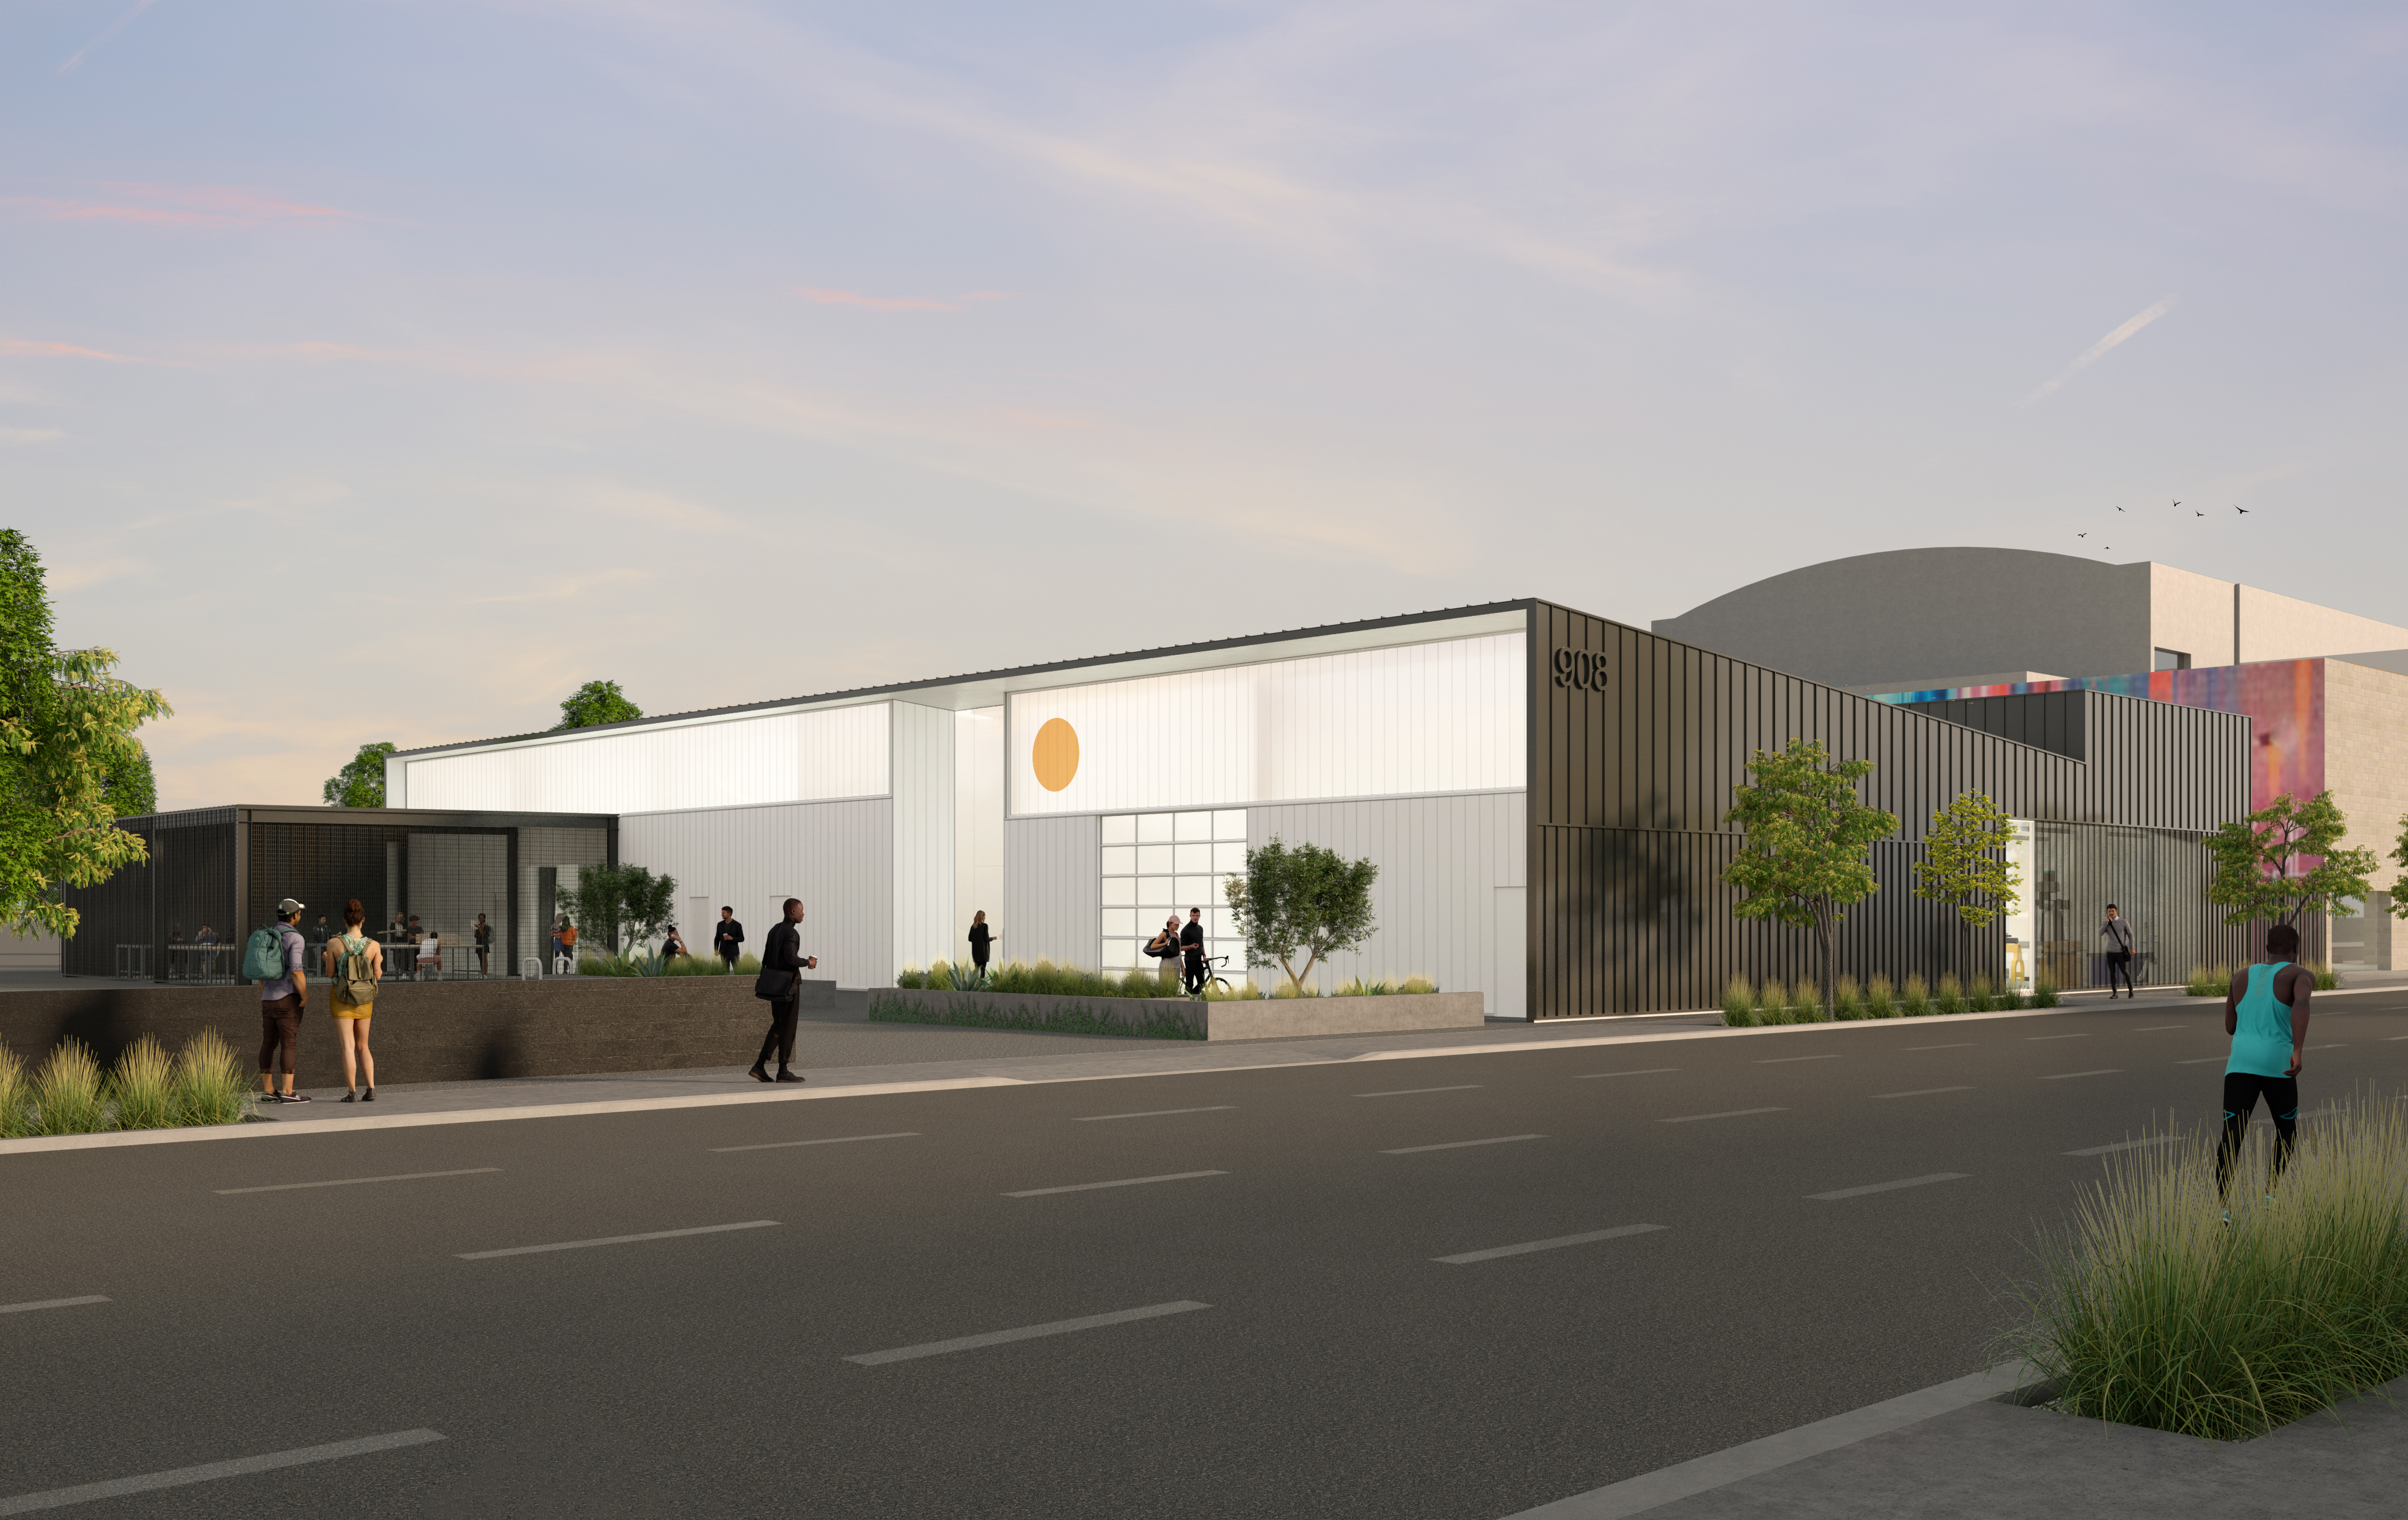 A rendering of the exterior of 908 Shops, as seen from Raymond Avenue on the campus of ArtCenter College of Design.